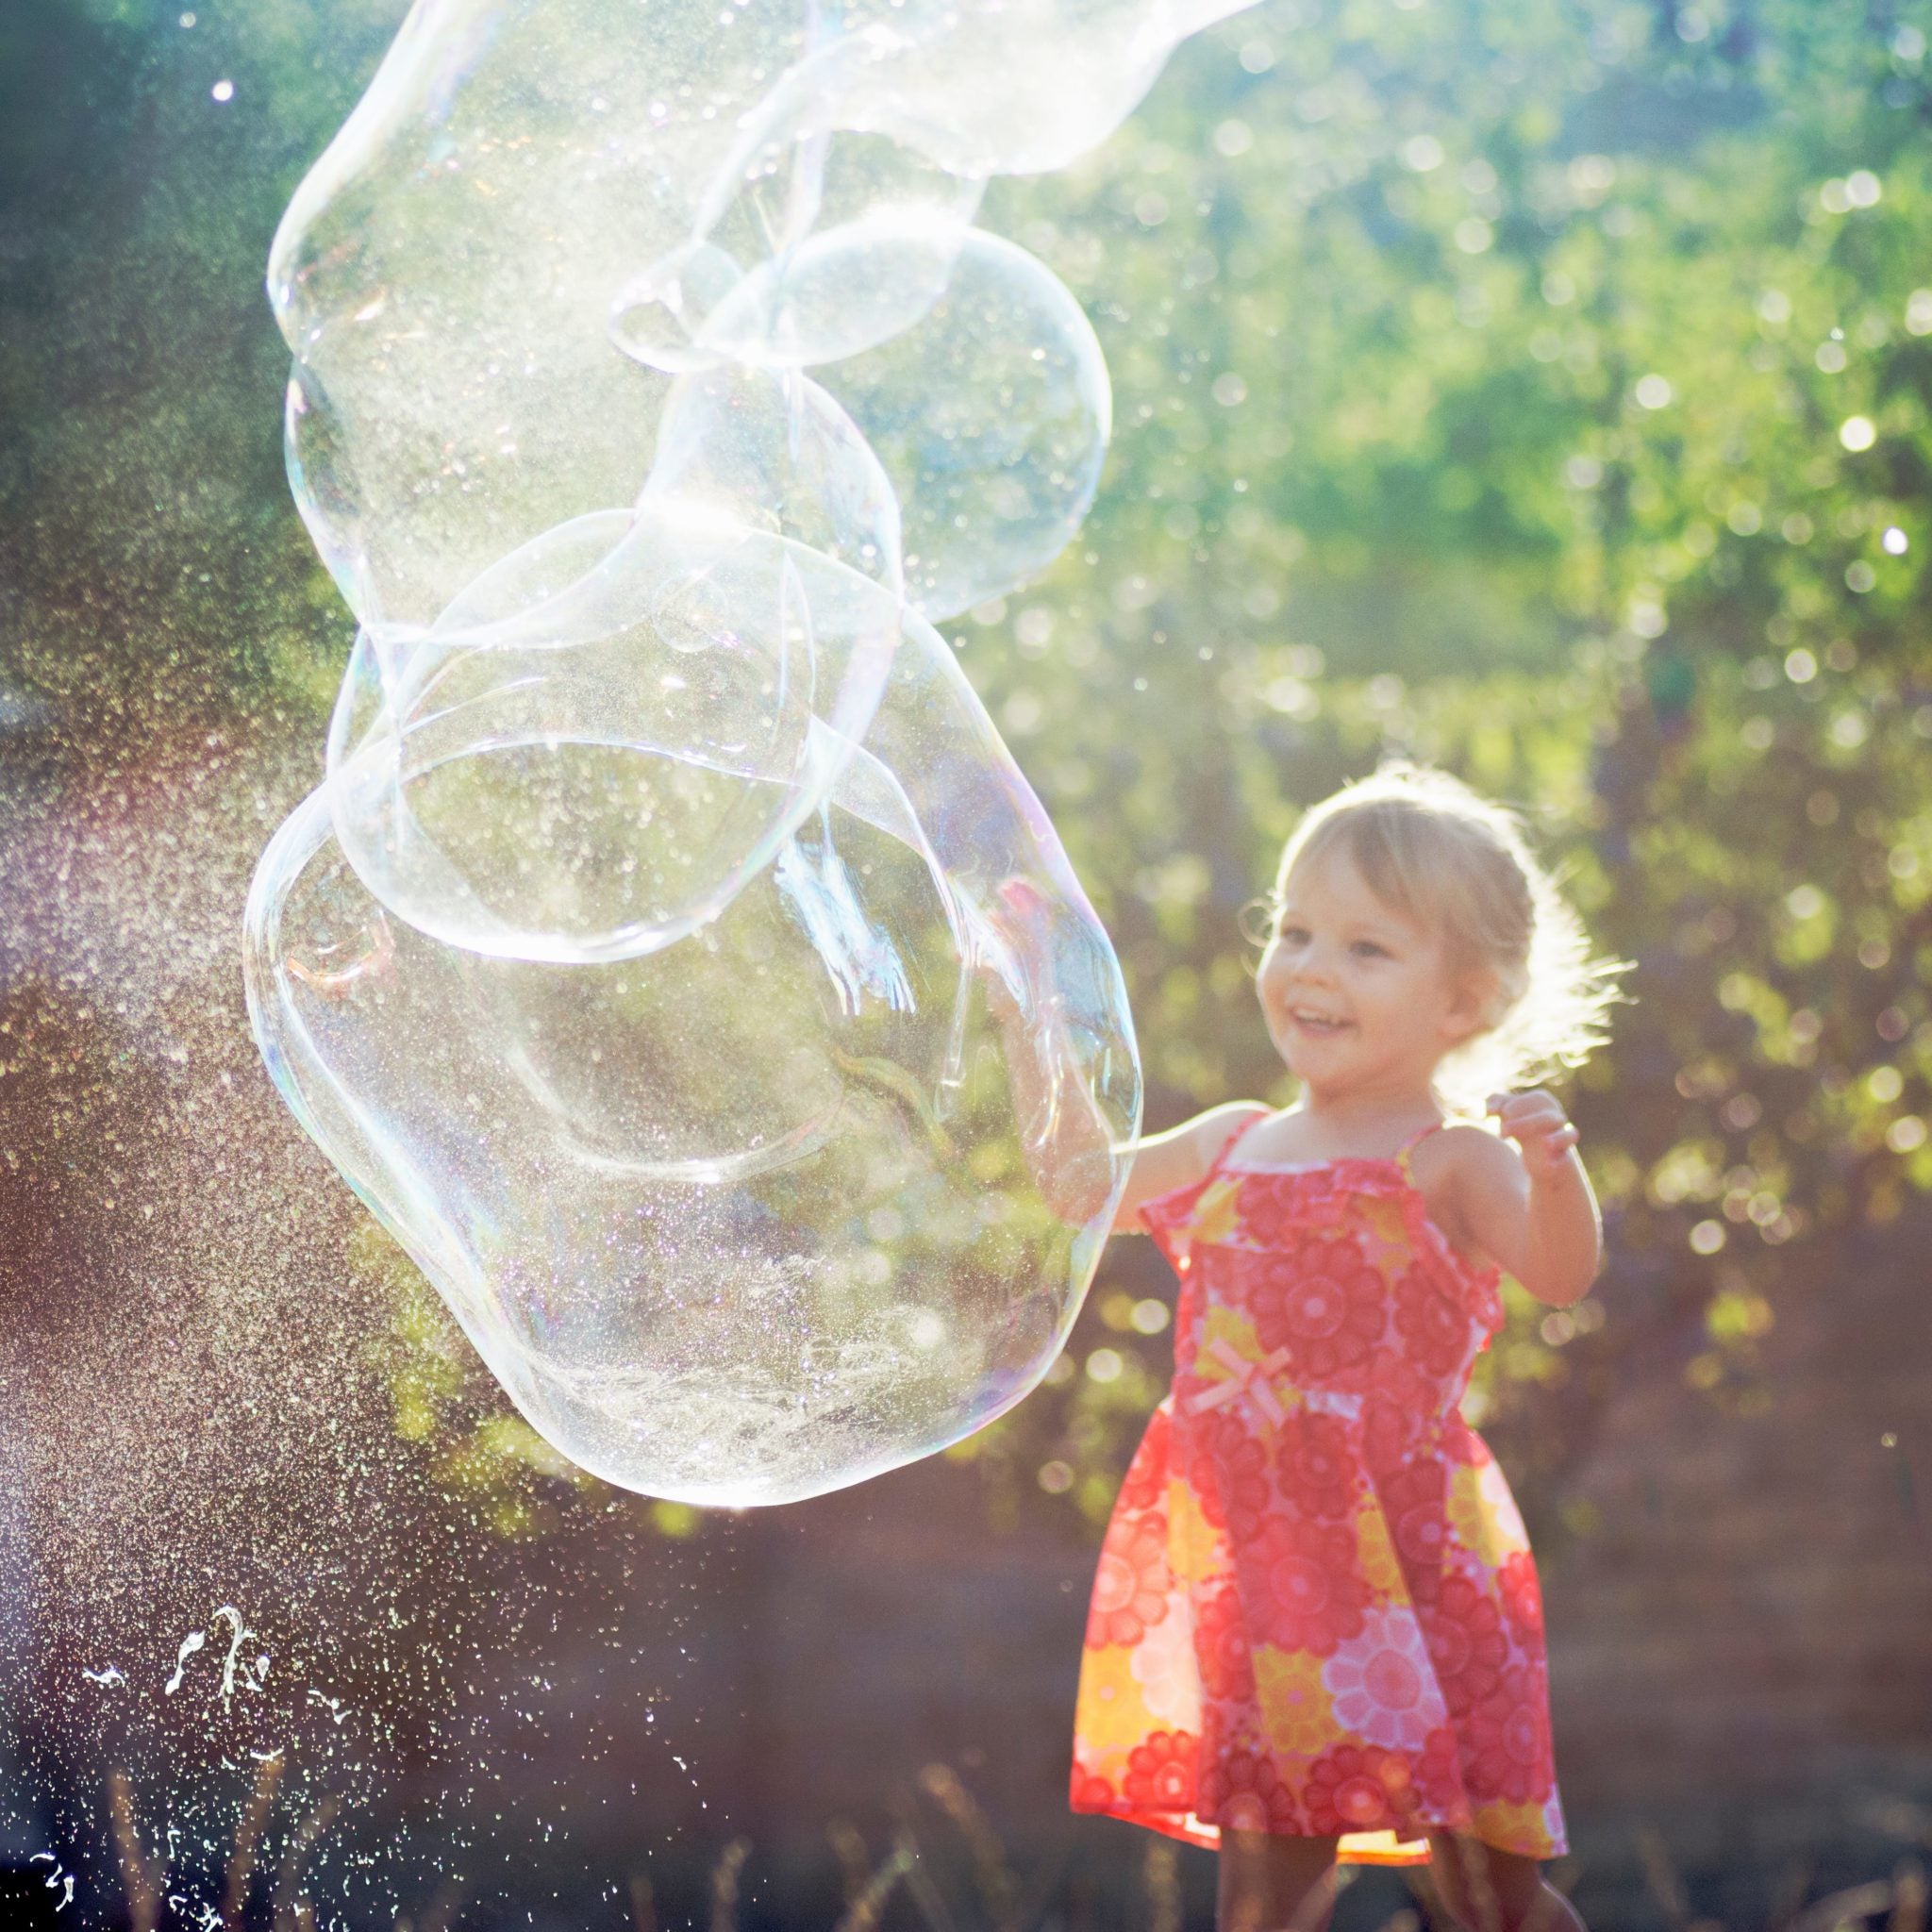 Little blonde girl creating bubbles